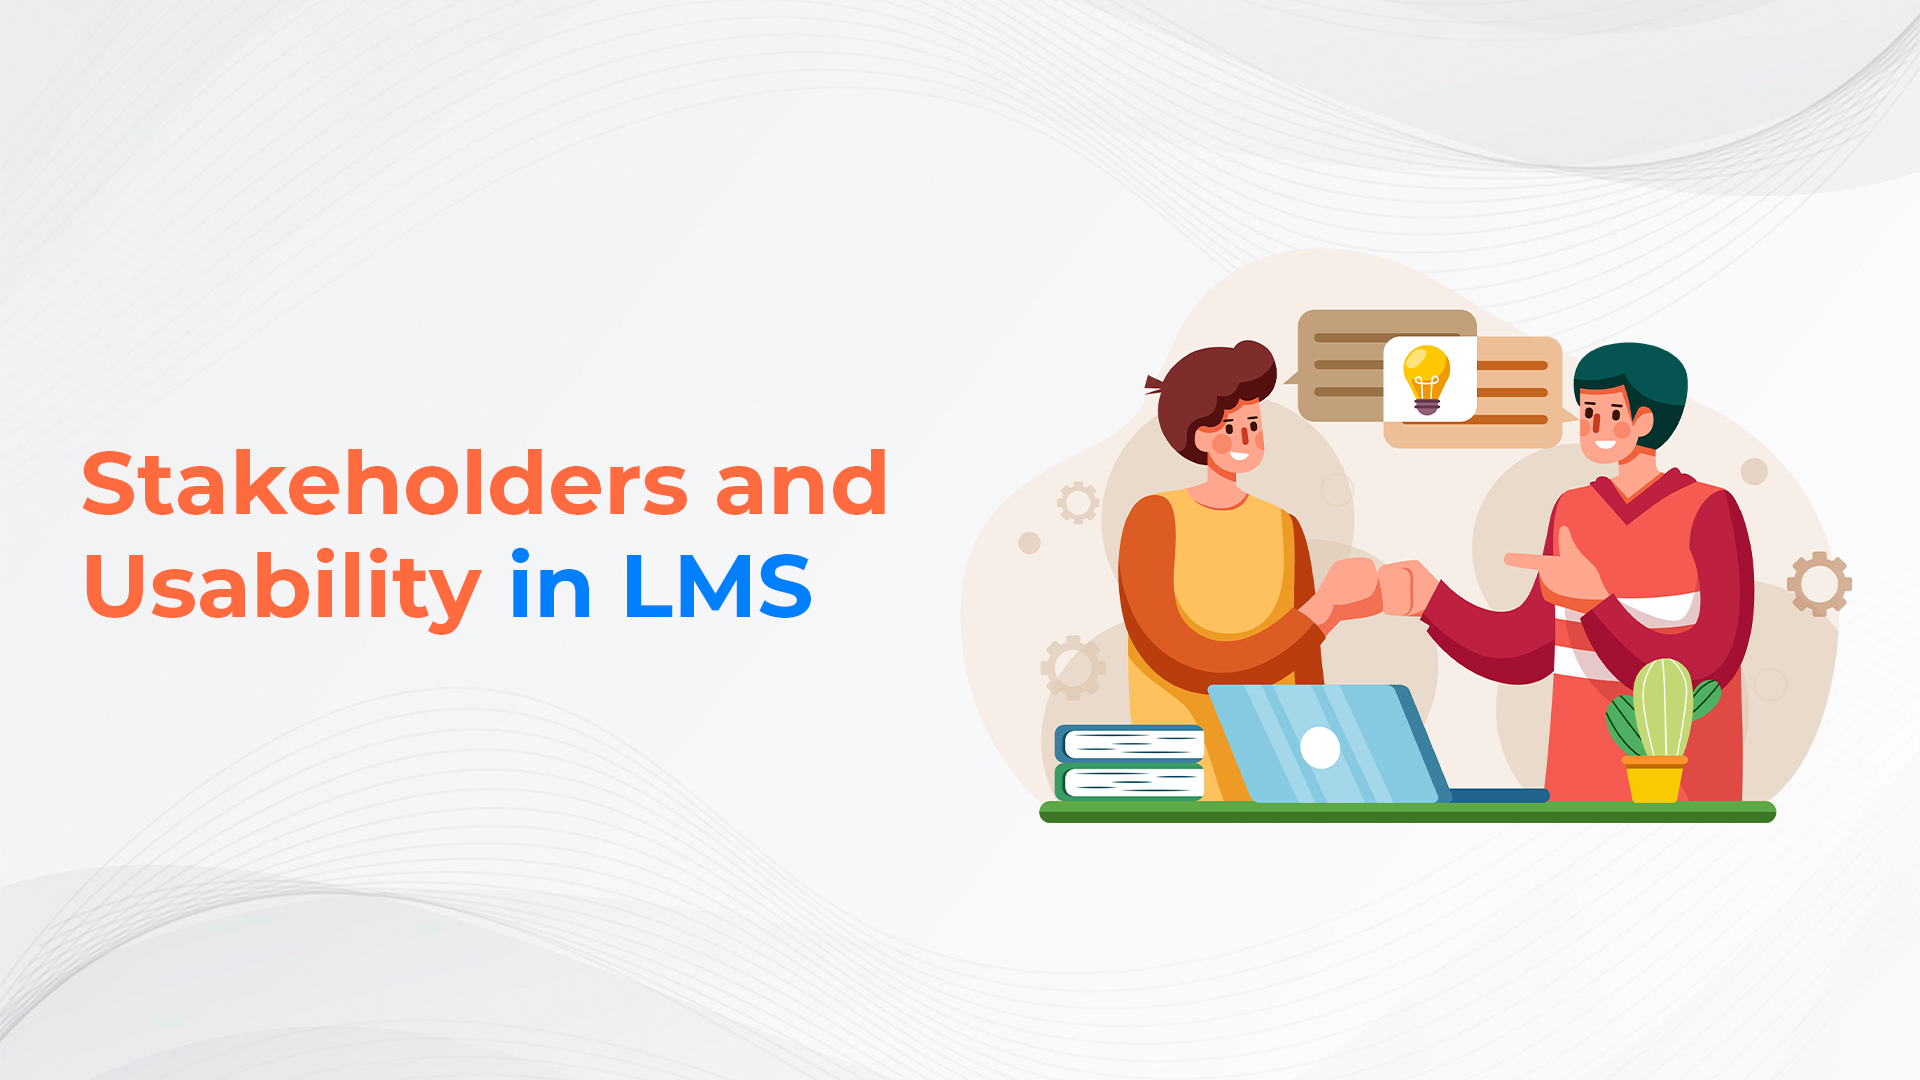 Stakeholders and Usability in LMS